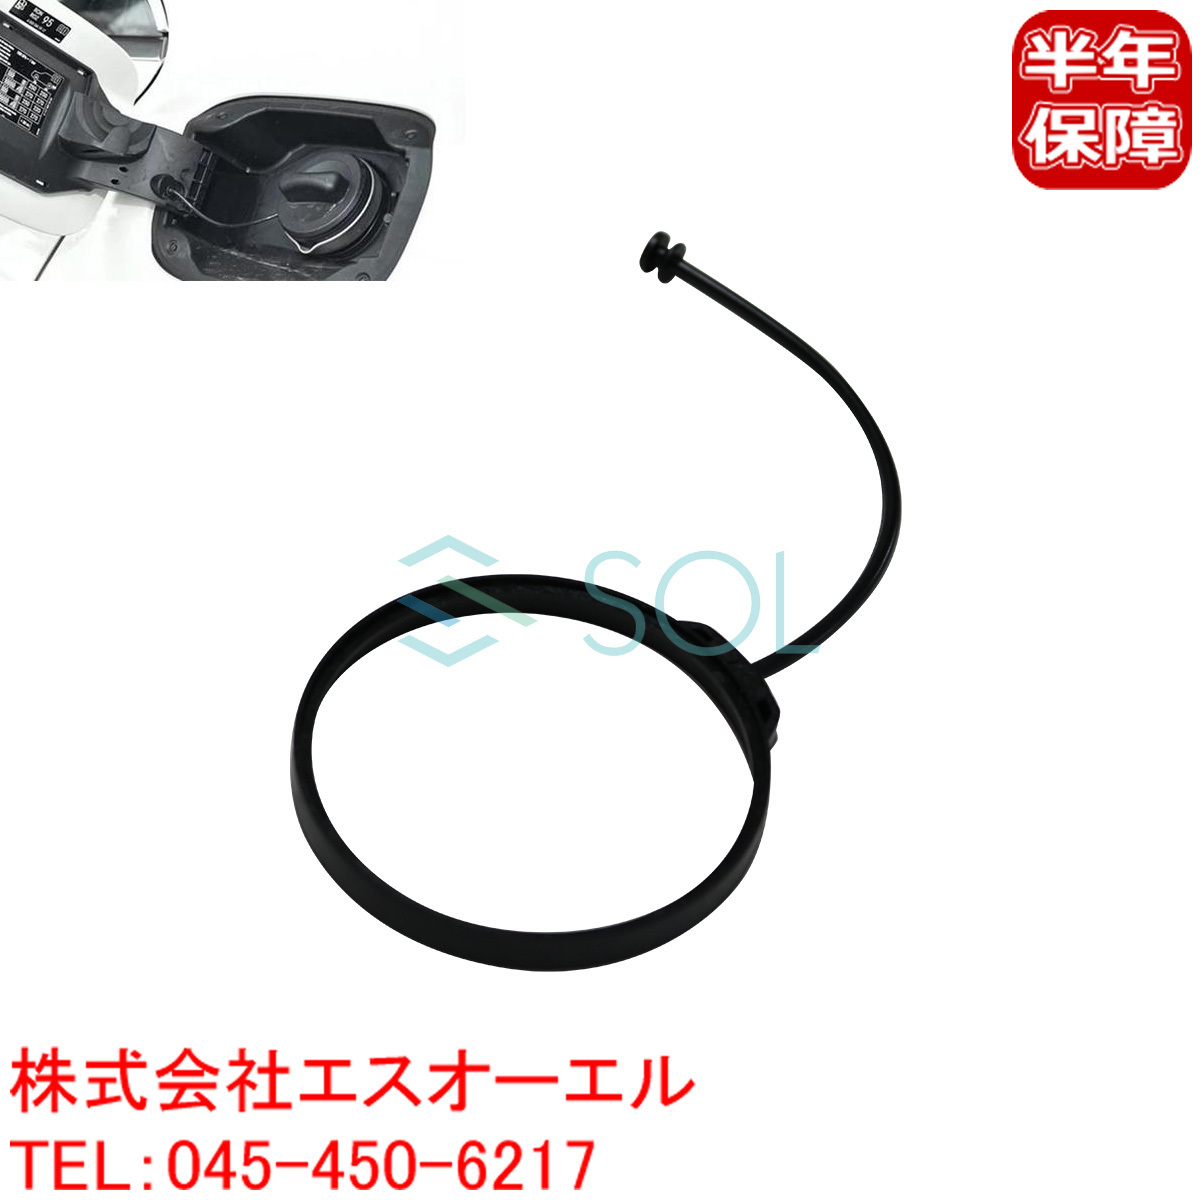  Benz W176 W246 W257 fuel cap repair for cable wire A180 A250 A45 B180 B250 CLS450 CLS53 0004700800 2224700005